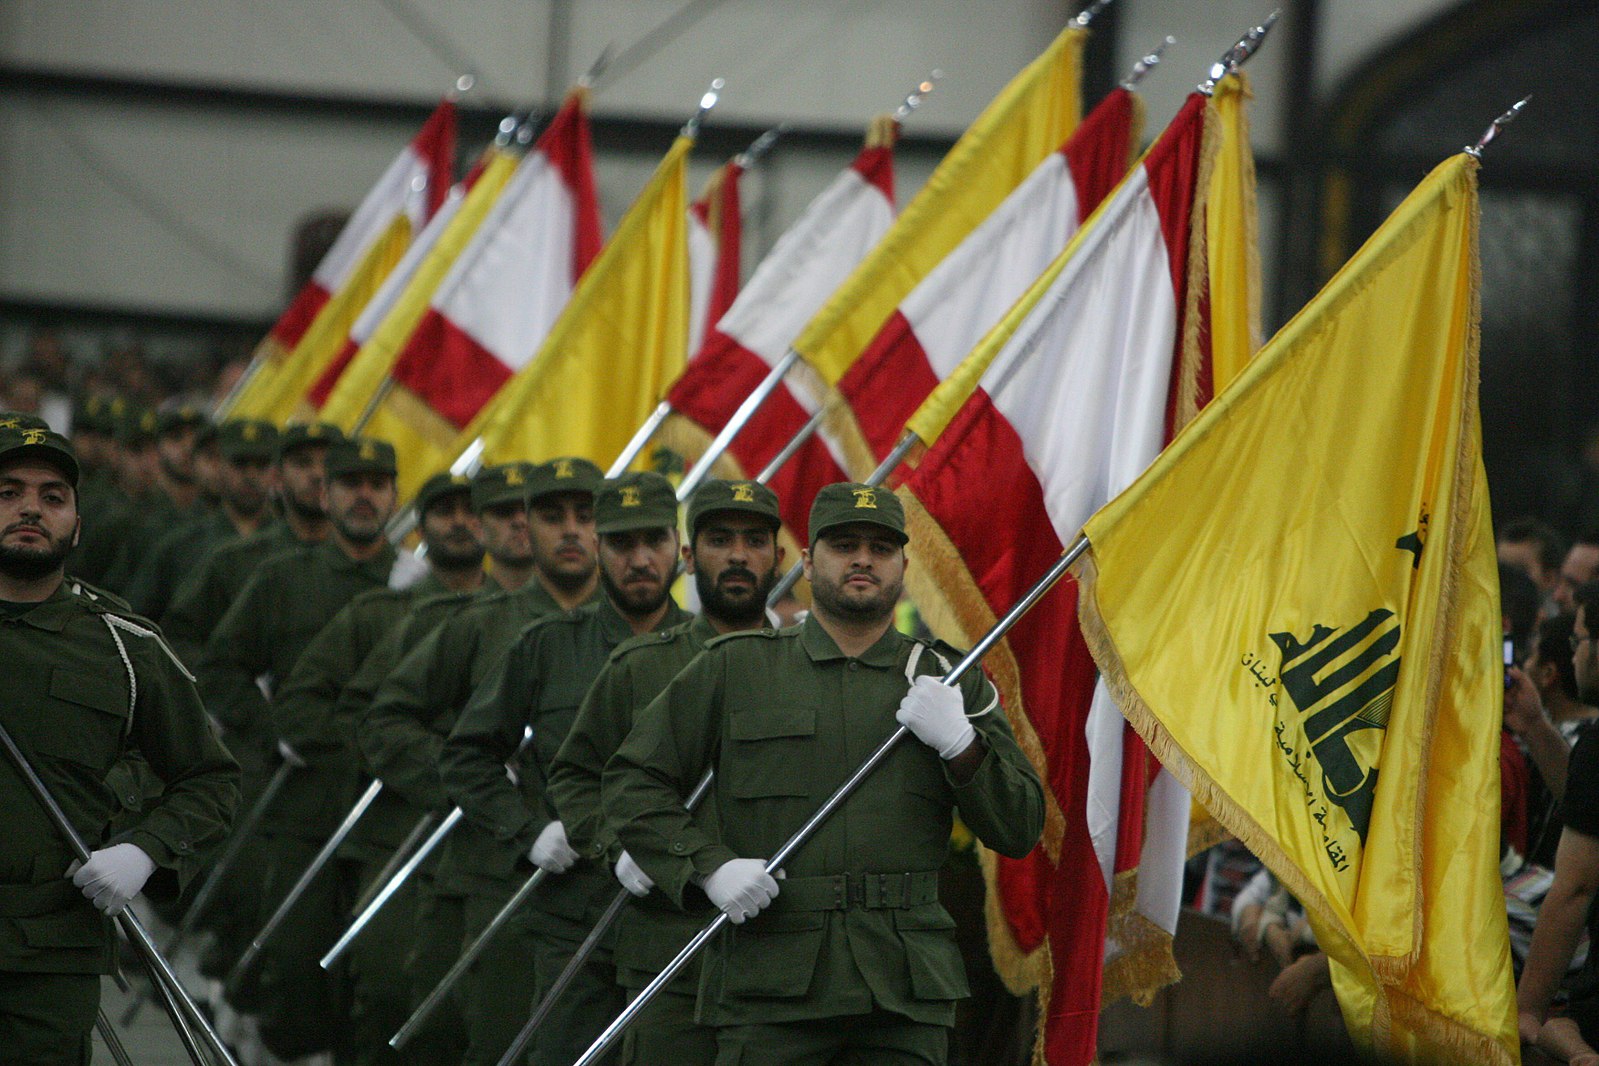 Hezbollah Moves Troops To The Israeli Border As It Prepares To Attack If A U.S.-Iran War Breaks Out